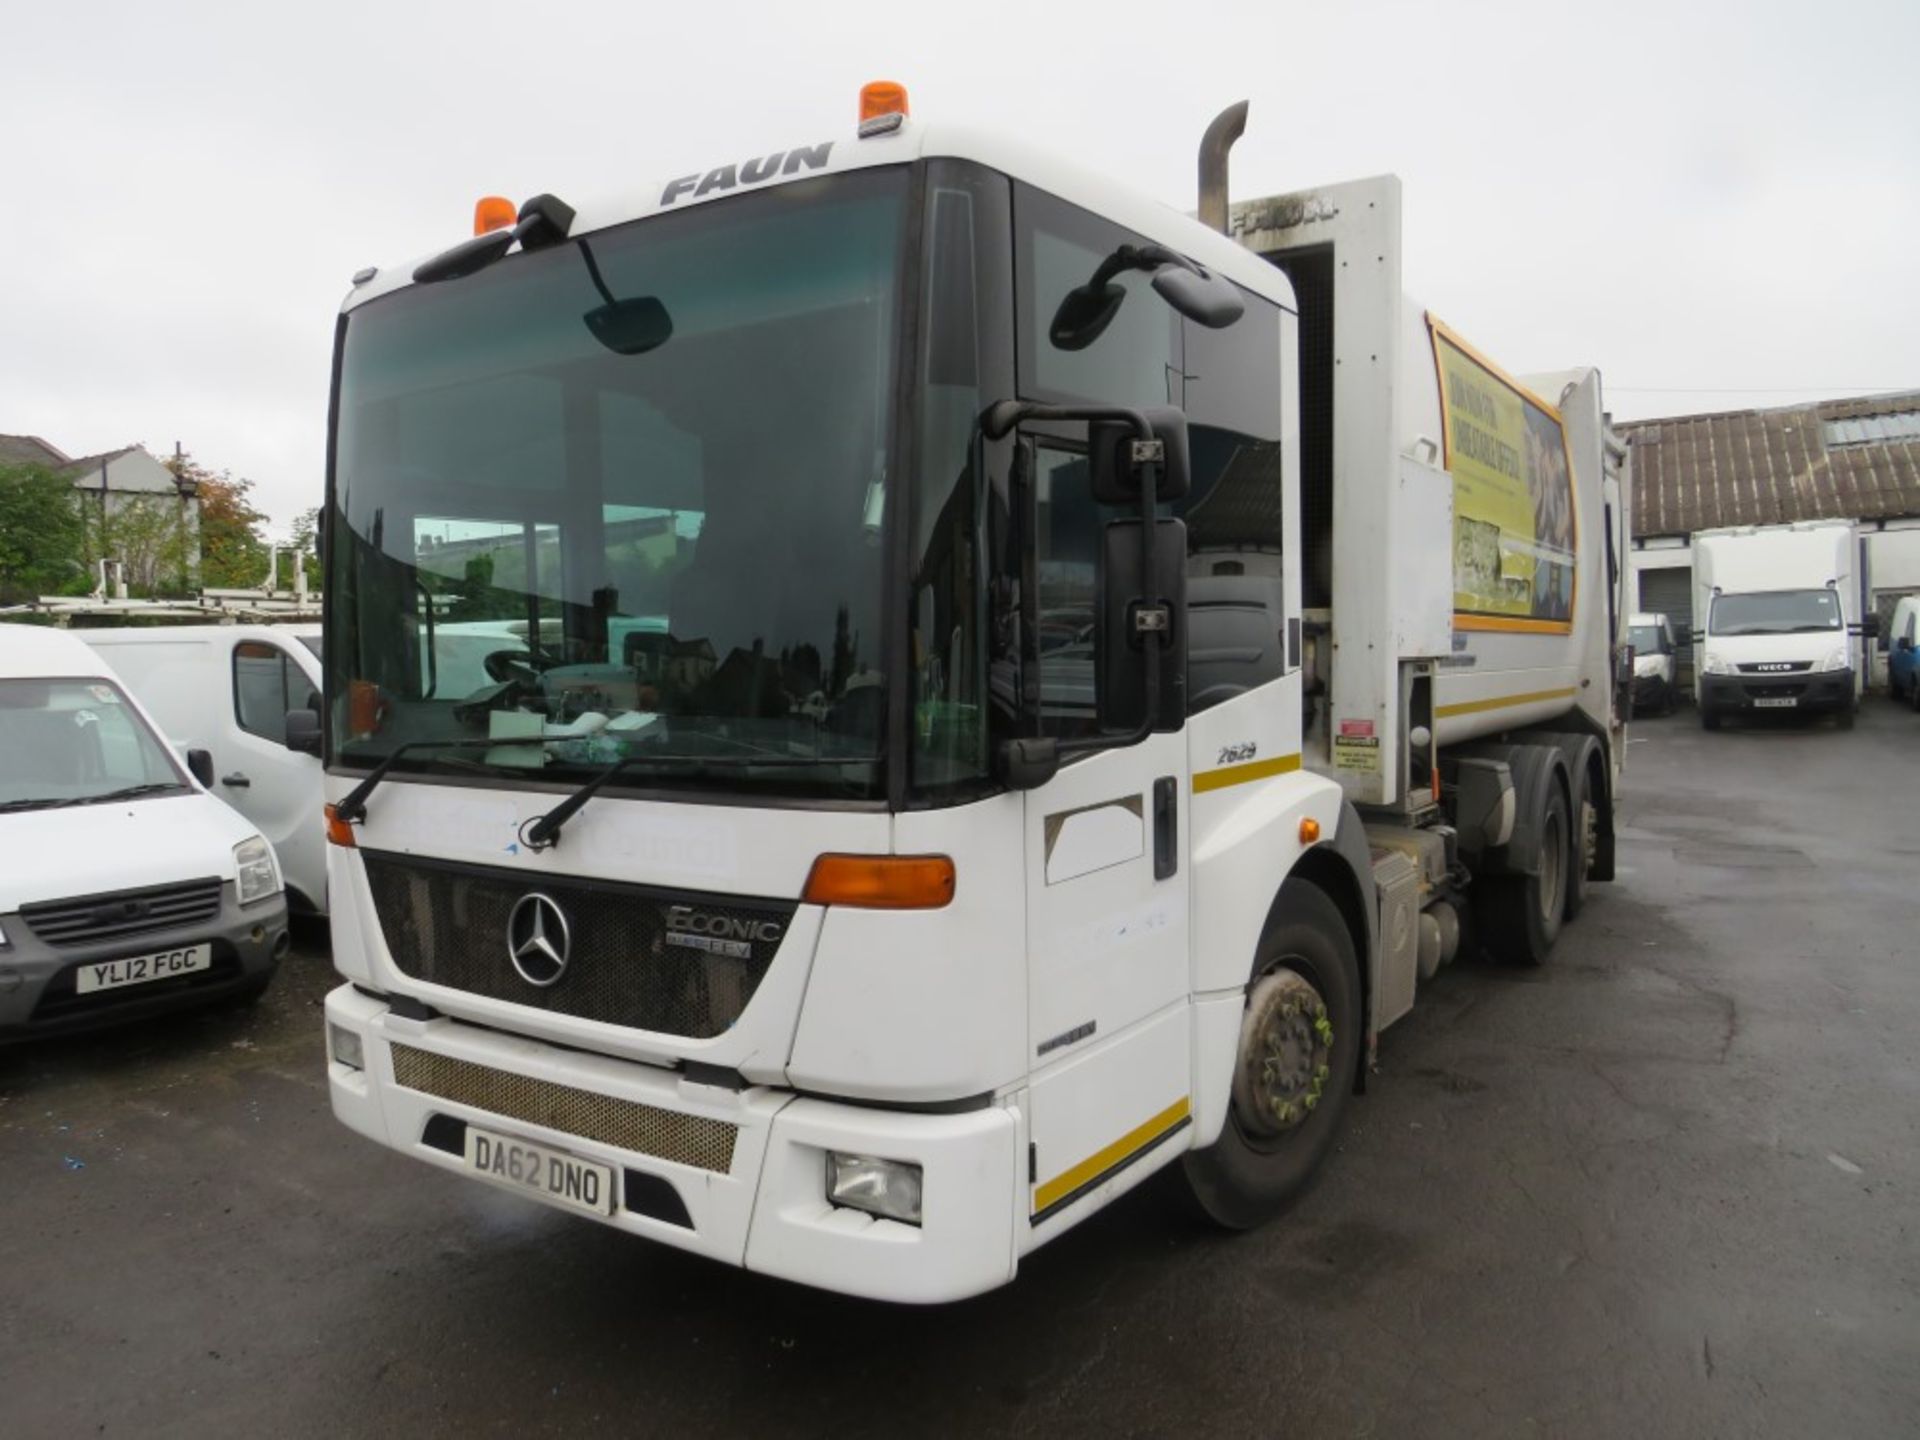 62 reg MERCEDES 2629 REFUSE WAGON (DIRECT COUNCIL) 1ST REG 11/12, 133887KM, V5 HERE, 1 OWNER FROM - Image 2 of 6